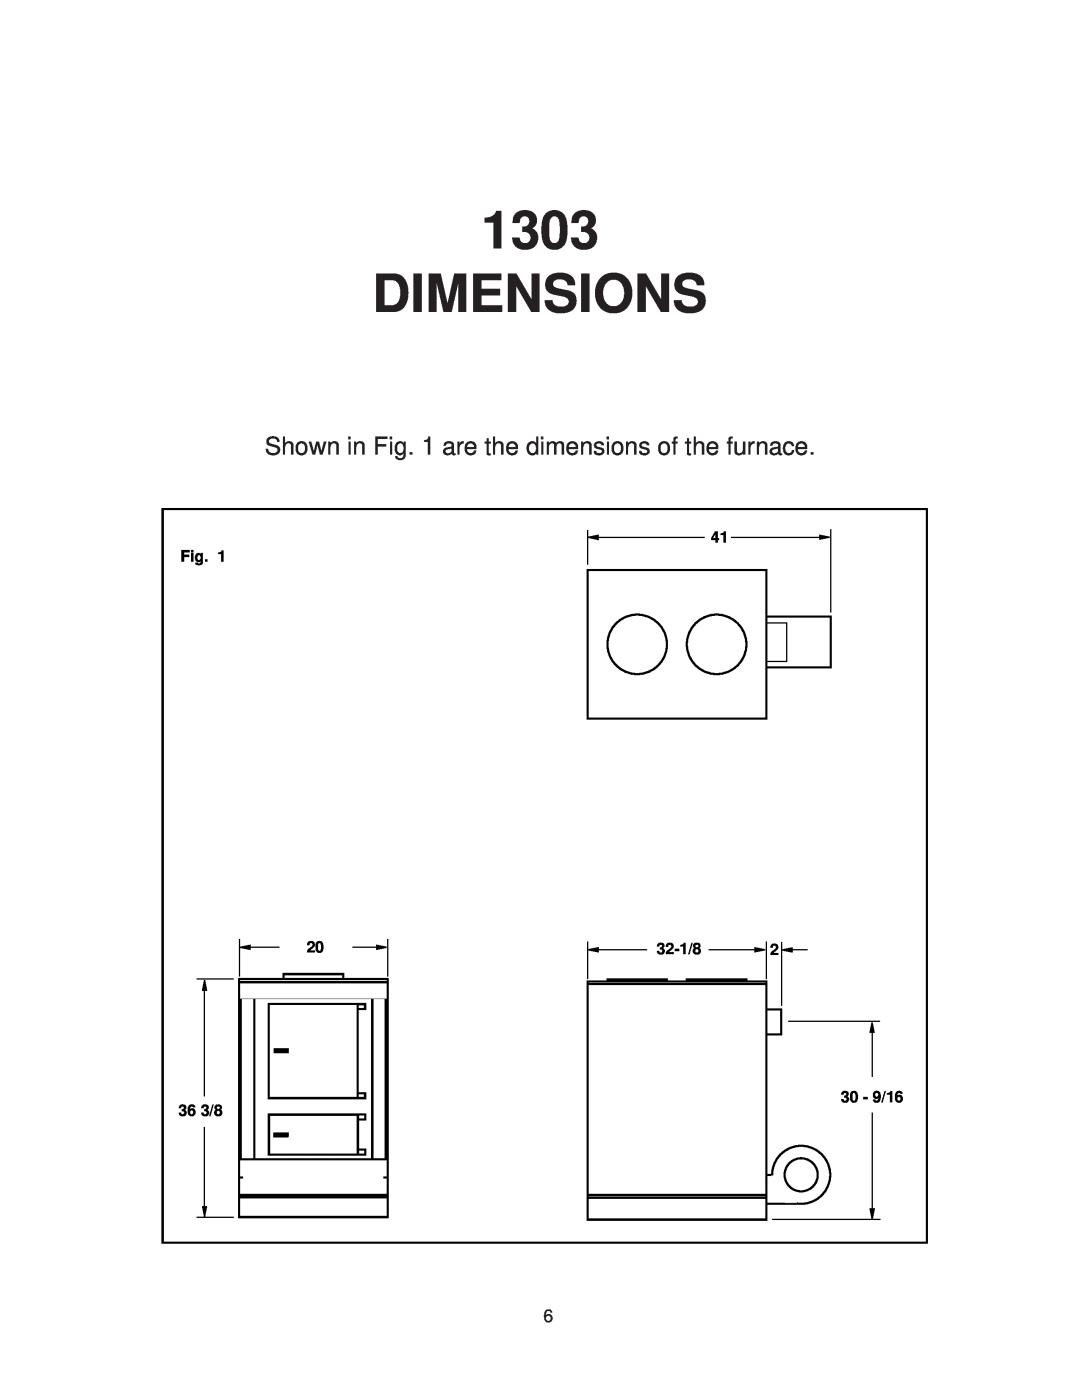 United States Stove 1303, AIR warranty Dimensions, Shown in are the dimensions of the furnace 